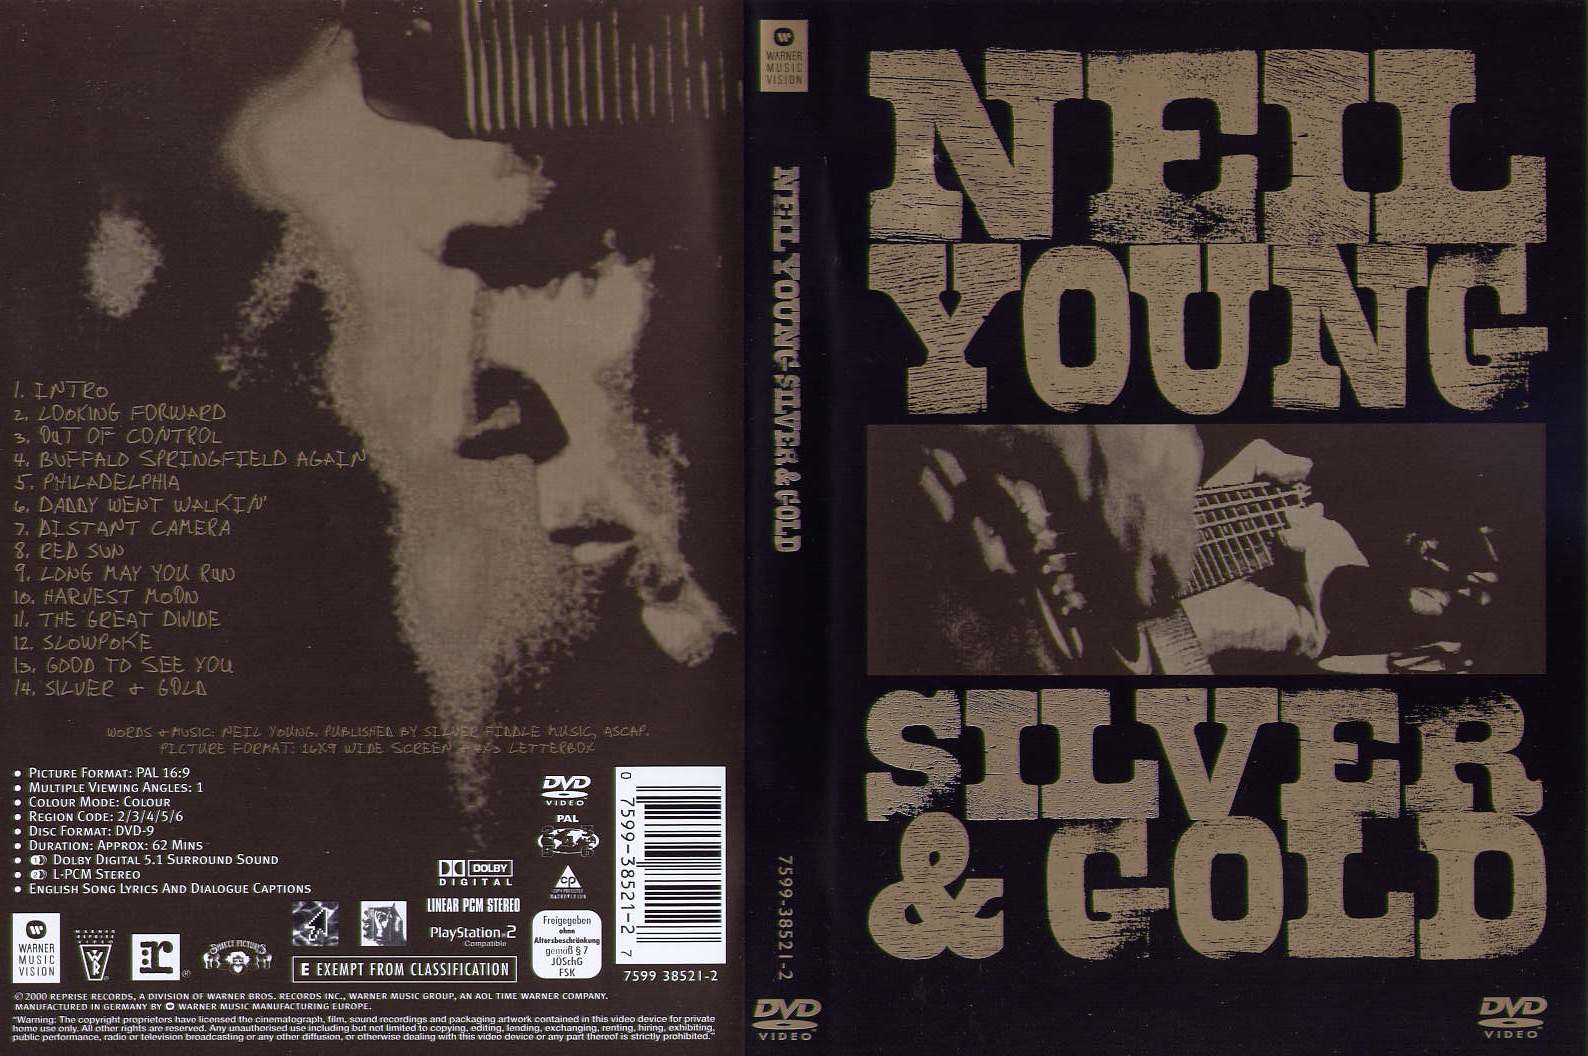 Jaquette DVD Neil Young silver and gold